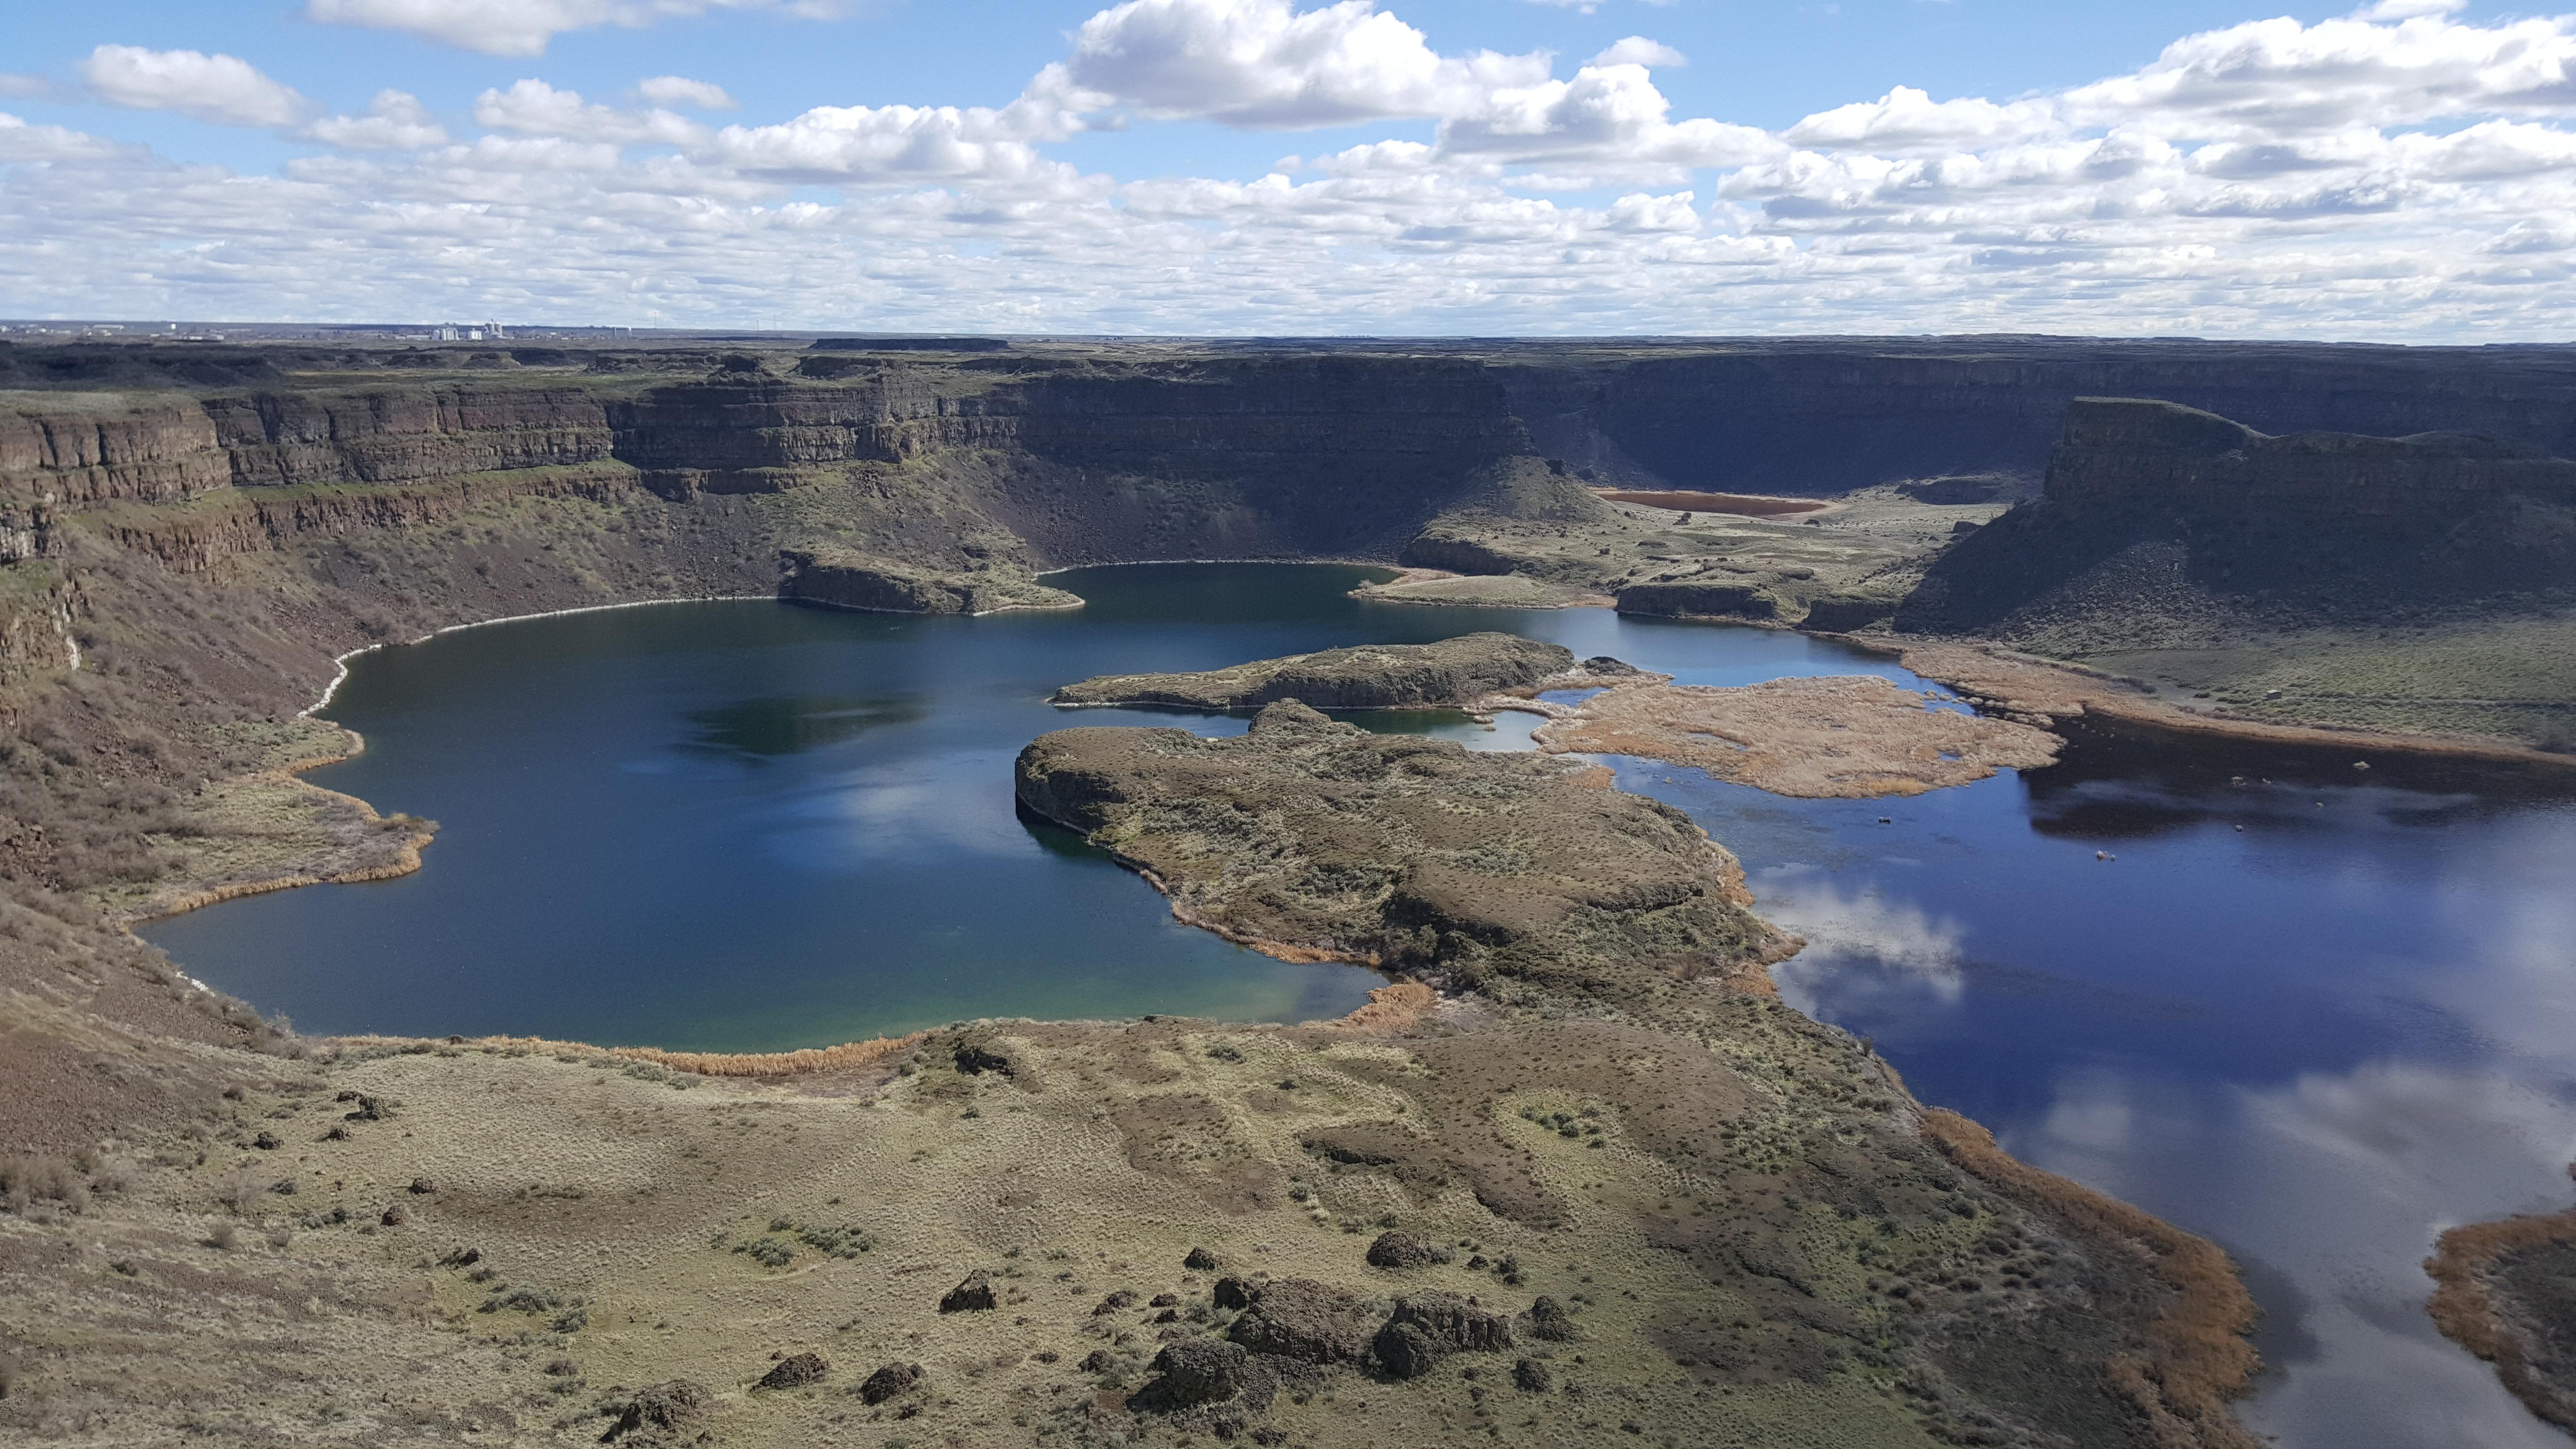 A overhead shot of the Dry Falls area